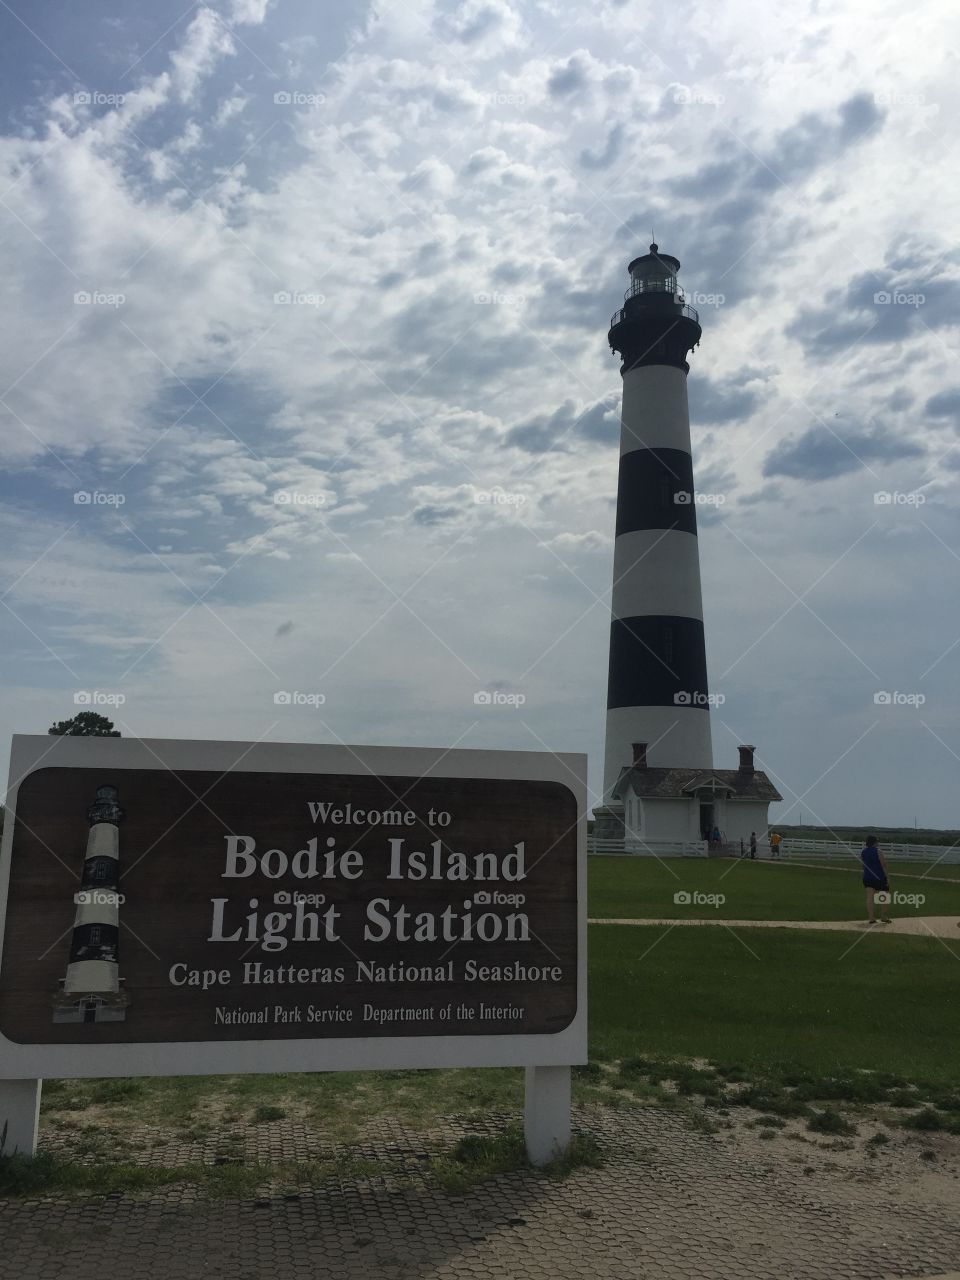 Bodie Island Lighthouse. The Bodie Island Lighthouse on the Outer Banks in North Carolina 